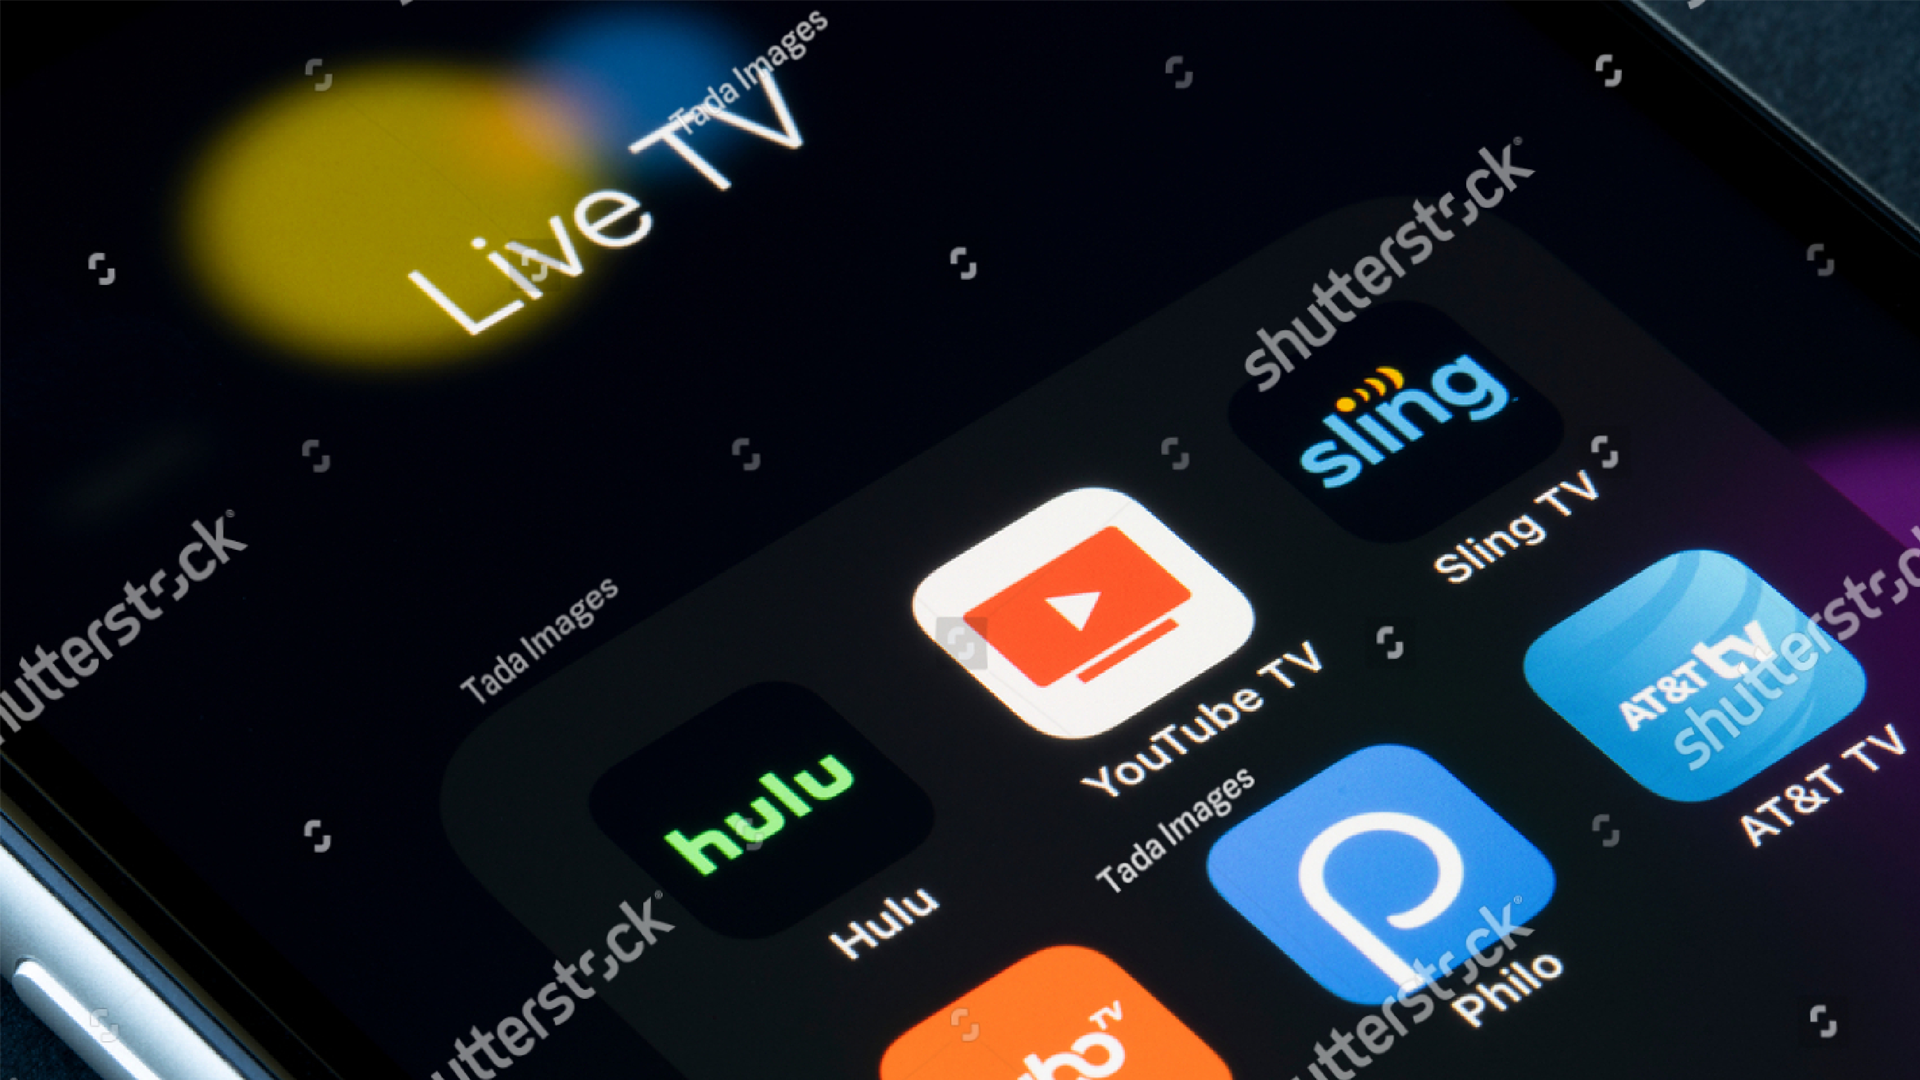 Assorted apps for live television streaming are seen on an iPhone, including Hulu, YouTube TV, Sling TV, FuboTV, Philo, and ATT TV